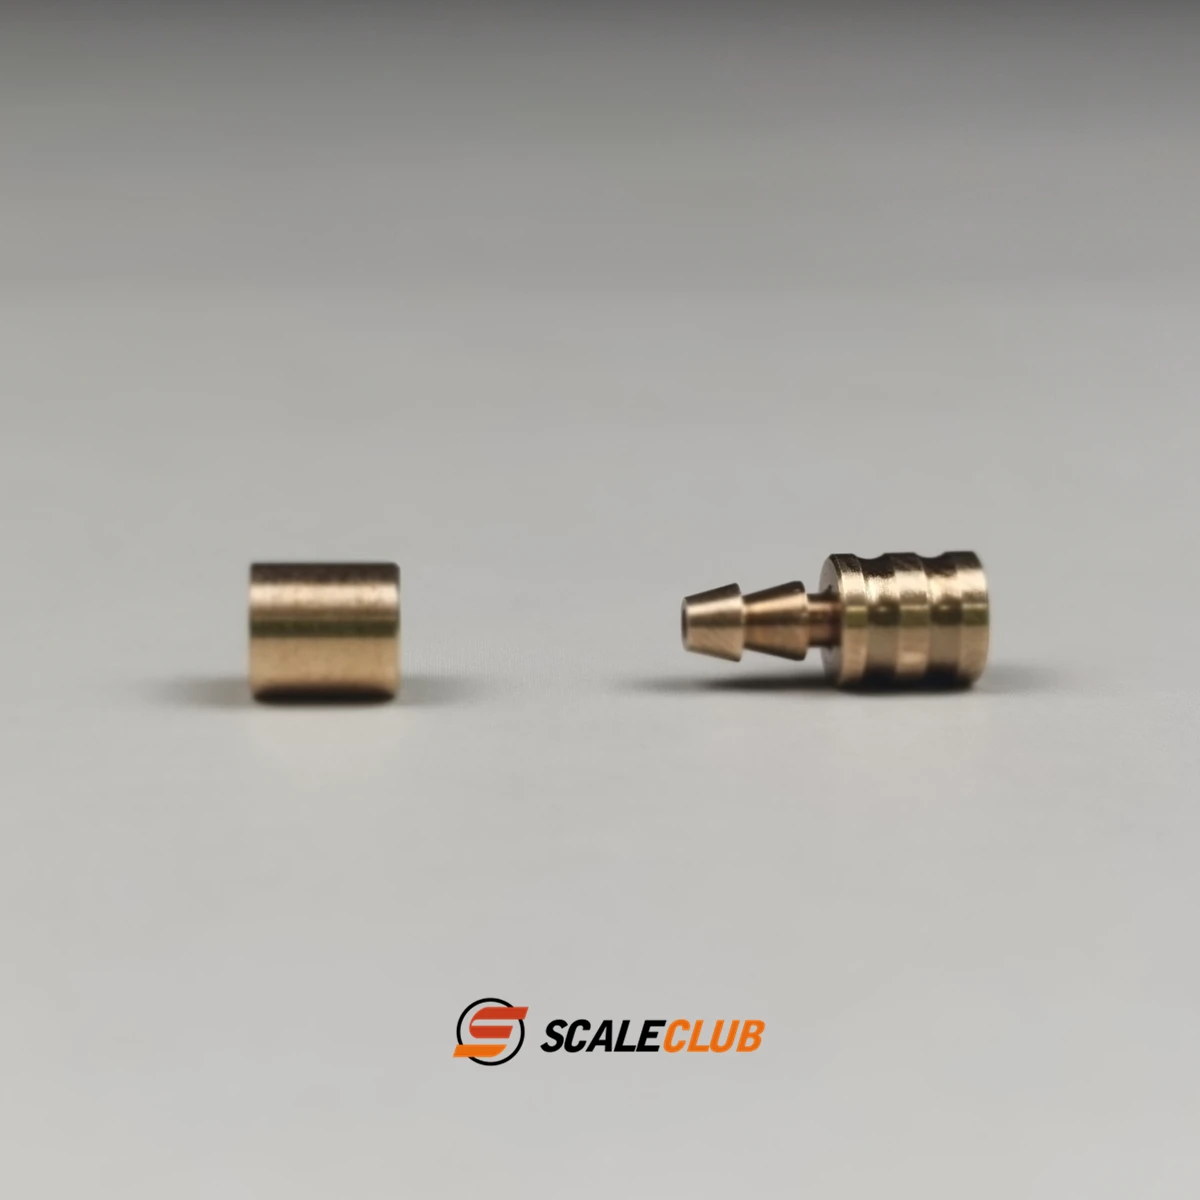 Scaleclub Model Scaleclub Hydraulic Nozzle 2.5mm Copper Pipe Welding Turn 3mm Oil Pipe enlarge